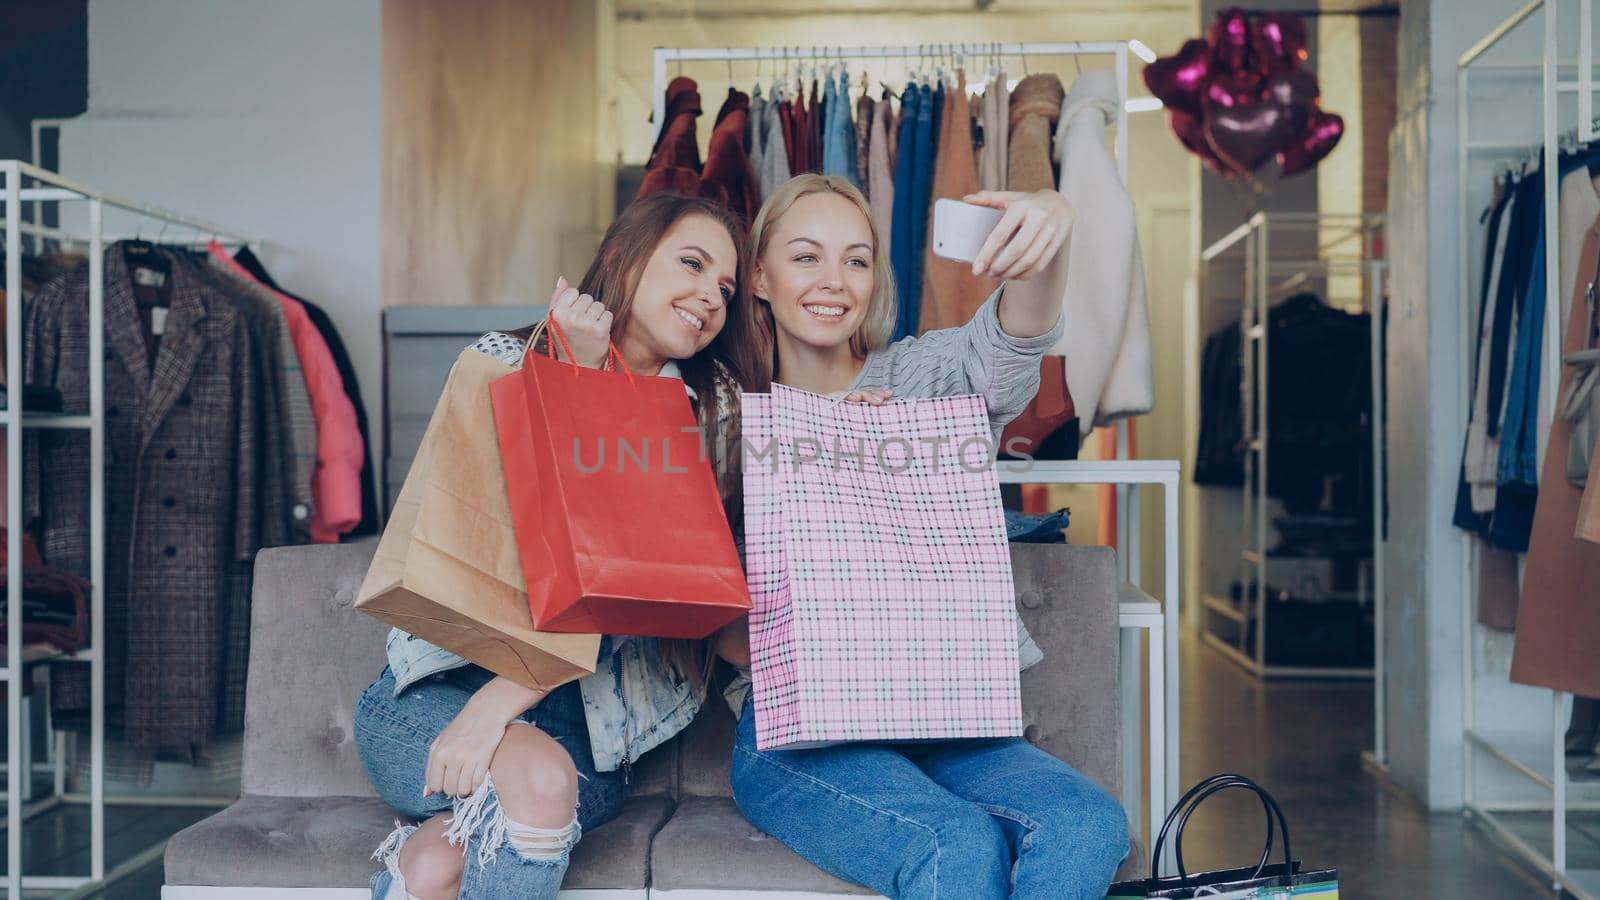 Attractive female friends are using smartphone to make selfie while sitting in women's clothing shop with lots of colourful paper bags. They are smiling, posing, laughing, gesturing.